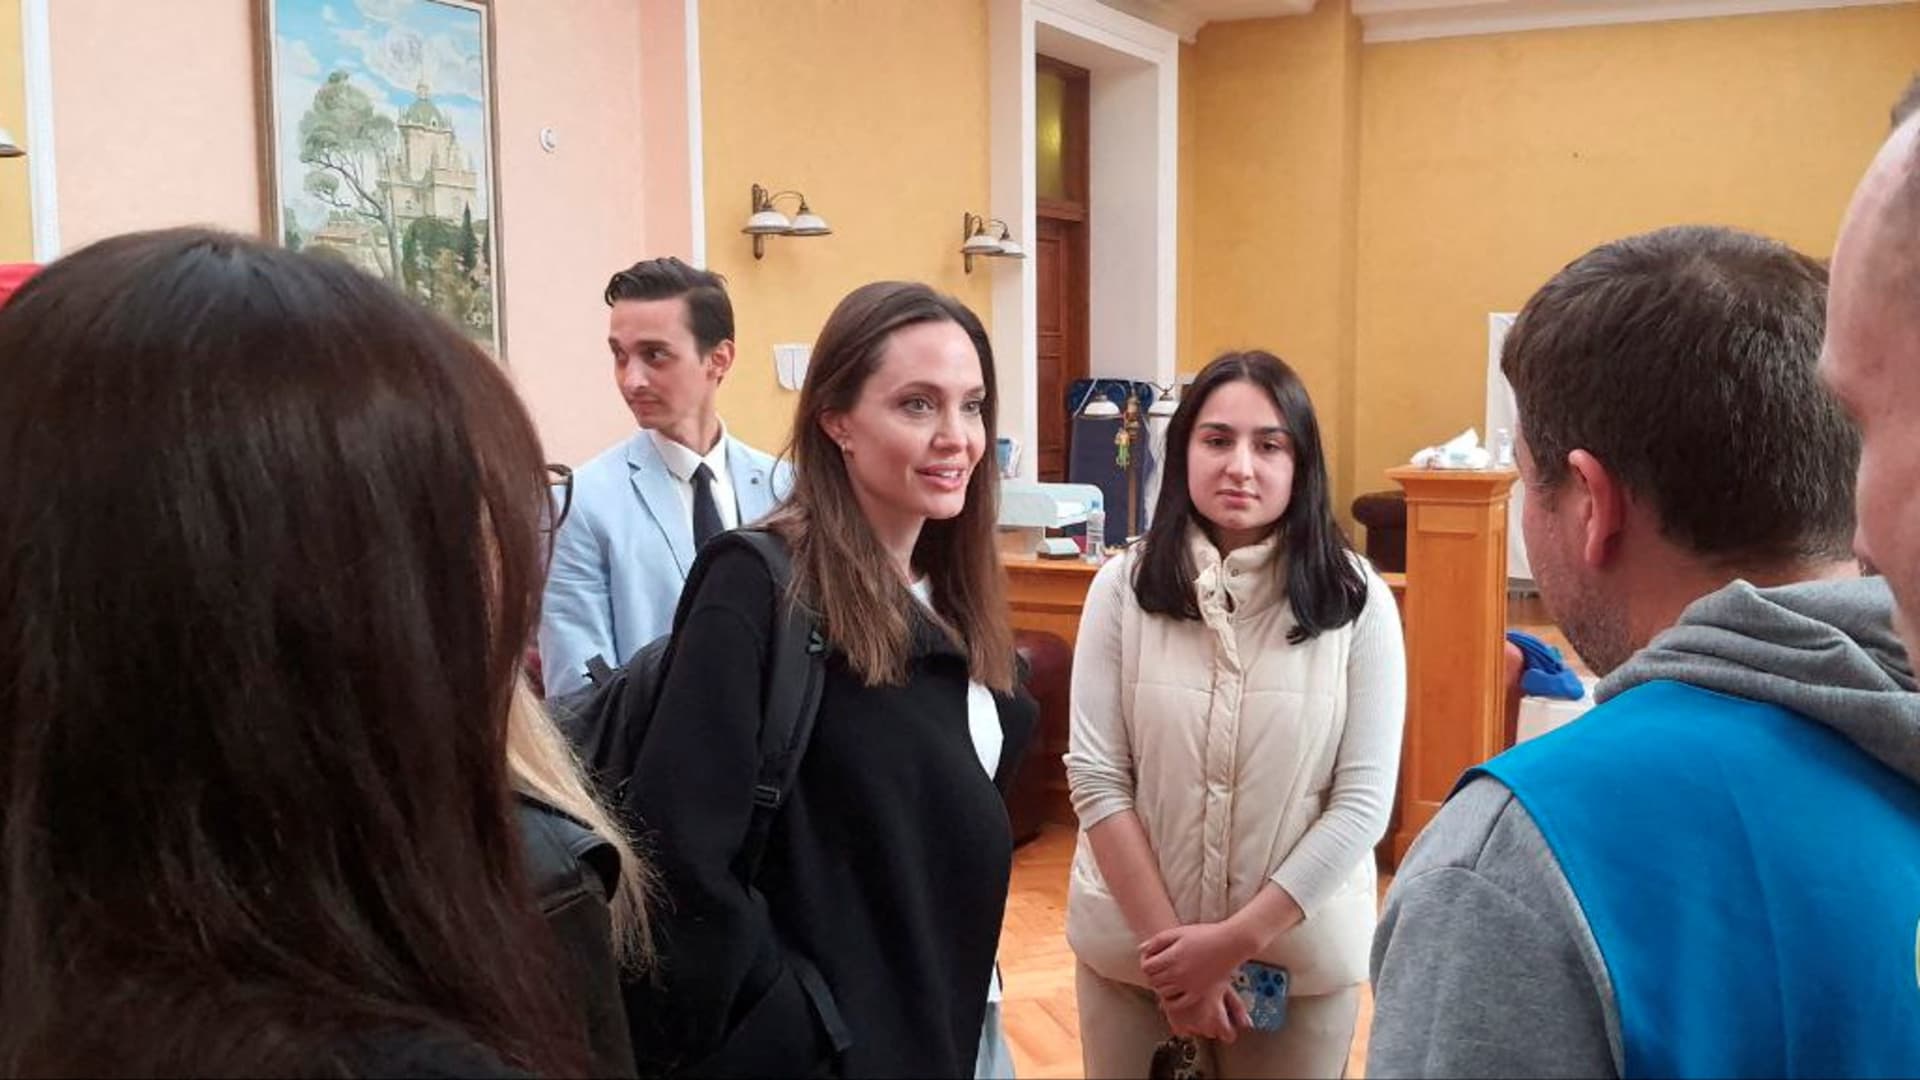 U.S. actor and UNHCR Special Envoy Angelina Jolie visits Lviv's main railway station, amid Russia's invasion of Ukraine April 30, 2022 in this handout image.